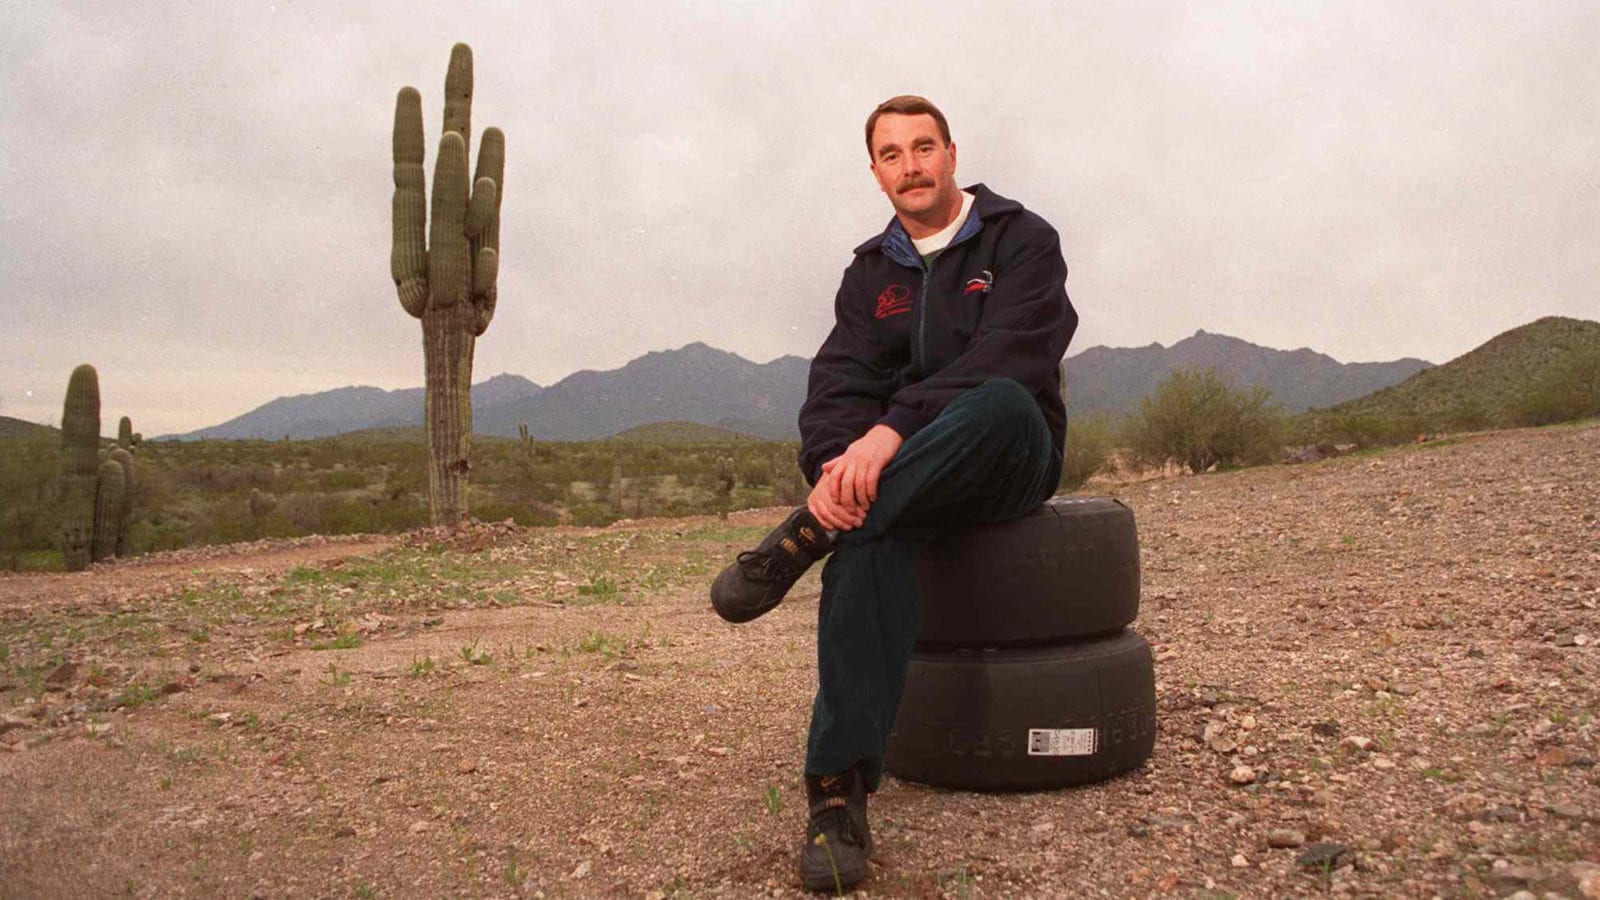 Nigel Mansell Formula One Racing Champion Now Indy Driver Sitting In Arizona Desert February 1993- (Photo By Paul Harris/Getty Images)